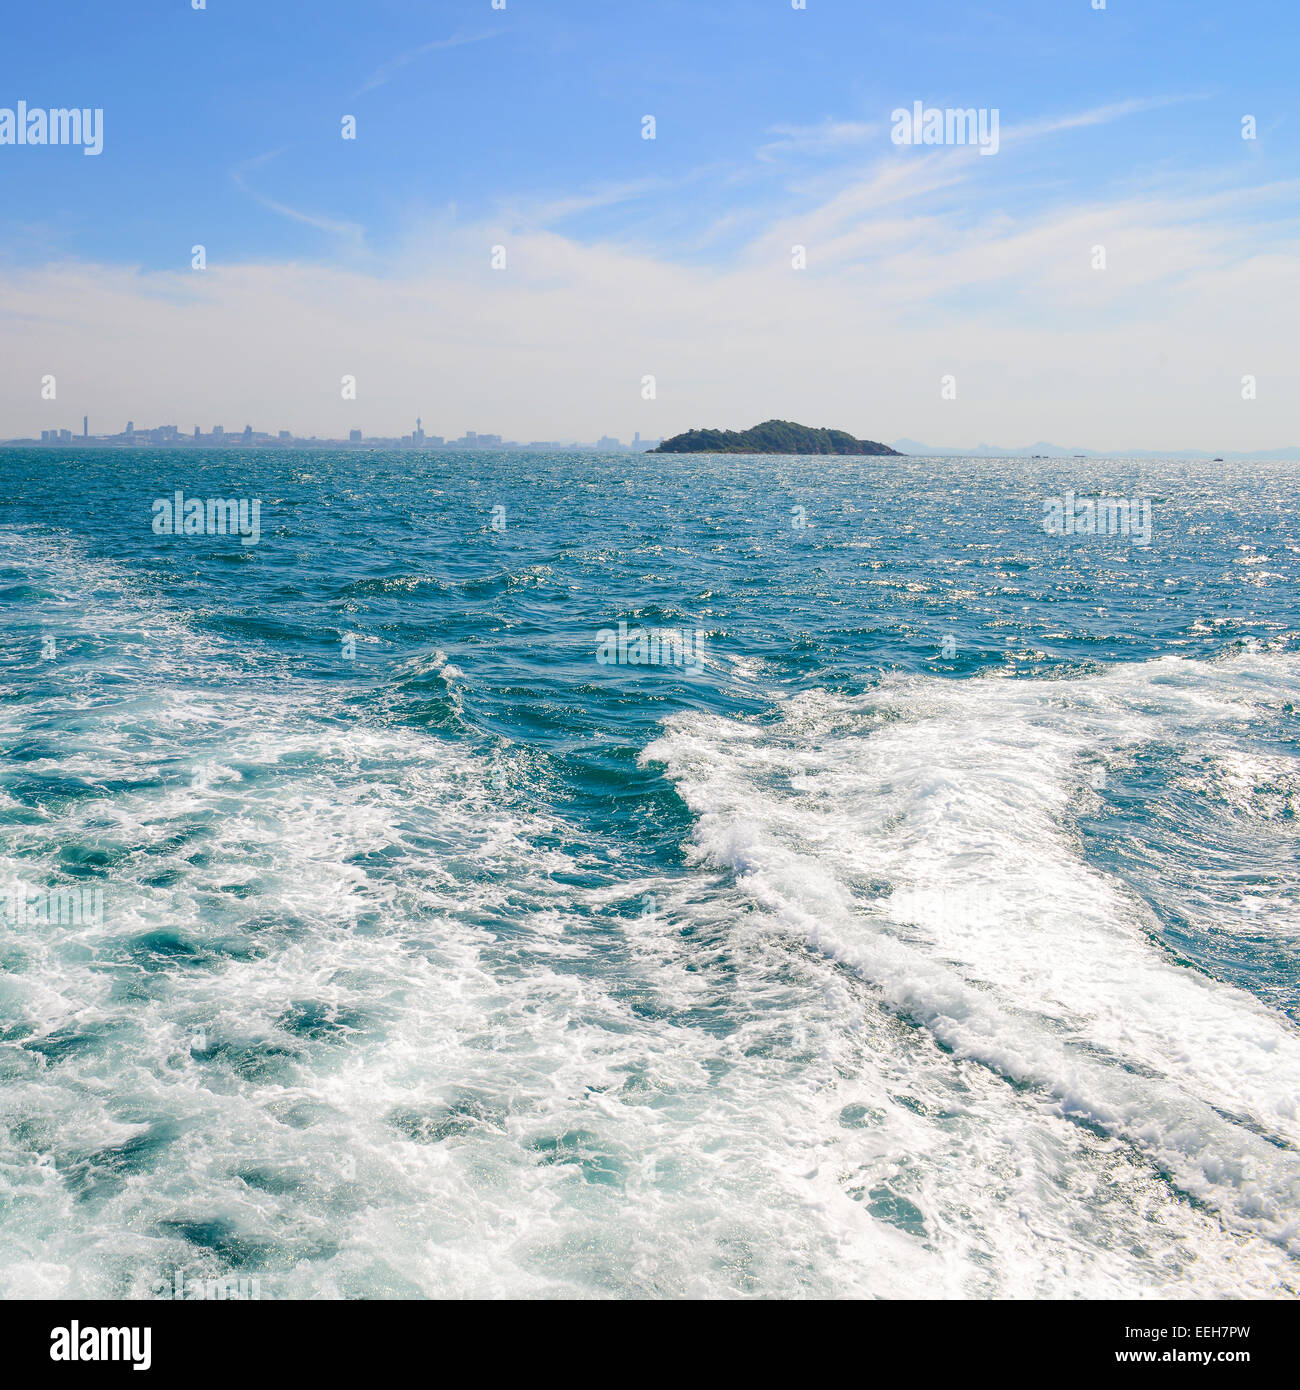 The wake of a boat as seen from the stern of a ship at Coast of Pattaya city, Thailand Stock Photo